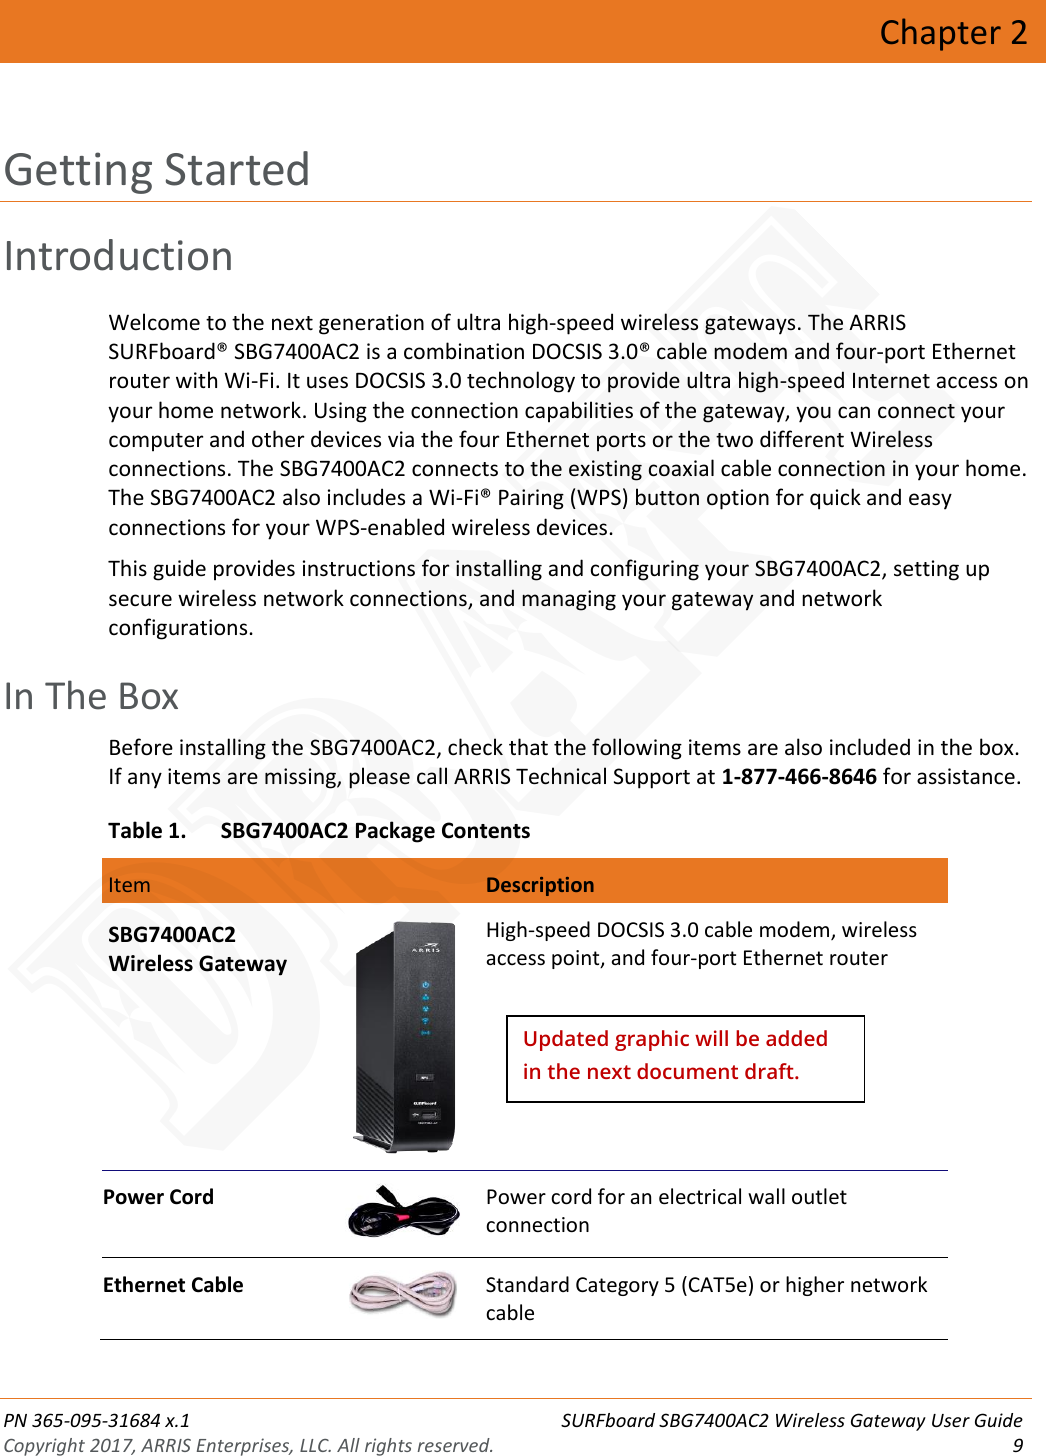  PN 365-095-31684 x.1 SURFboard SBG7400AC2 Wireless Gateway User Guide Copyright 2017, ARRIS Enterprises, LLC. All rights reserved.  9  Chapter 2 Getting Started Introduction Welcome to the next generation of ultra high-speed wireless gateways. The ARRIS SURFboard® SBG7400AC2 is a combination DOCSIS 3.0® cable modem and four-port Ethernet router with Wi-Fi. It uses DOCSIS 3.0 technology to provide ultra high-speed Internet access on your home network. Using the connection capabilities of the gateway, you can connect your computer and other devices via the four Ethernet ports or the two different Wireless connections. The SBG7400AC2 connects to the existing coaxial cable connection in your home. The SBG7400AC2 also includes a Wi-Fi® Pairing (WPS) button option for quick and easy connections for your WPS-enabled wireless devices. This guide provides instructions for installing and configuring your SBG7400AC2, setting up secure wireless network connections, and managing your gateway and network configurations.   In The Box Before installing the SBG7400AC2, check that the following items are also included in the box. If any items are missing, please call ARRIS Technical Support at 1-877-466-8646 for assistance. Table 1. SBG7400AC2 Package Contents  Item  Description  Blinking On (Solid) SBG7400AC2 Wireless Gateway  High-speed DOCSIS 3.0 cable modem, wireless access point, and four-port Ethernet router Power Cord  Power cord for an electrical wall outlet connection Ethernet Cable  Standard Category 5 (CAT5e) or higher network cable Updated graphic will be added in the next document draft. DRAFT